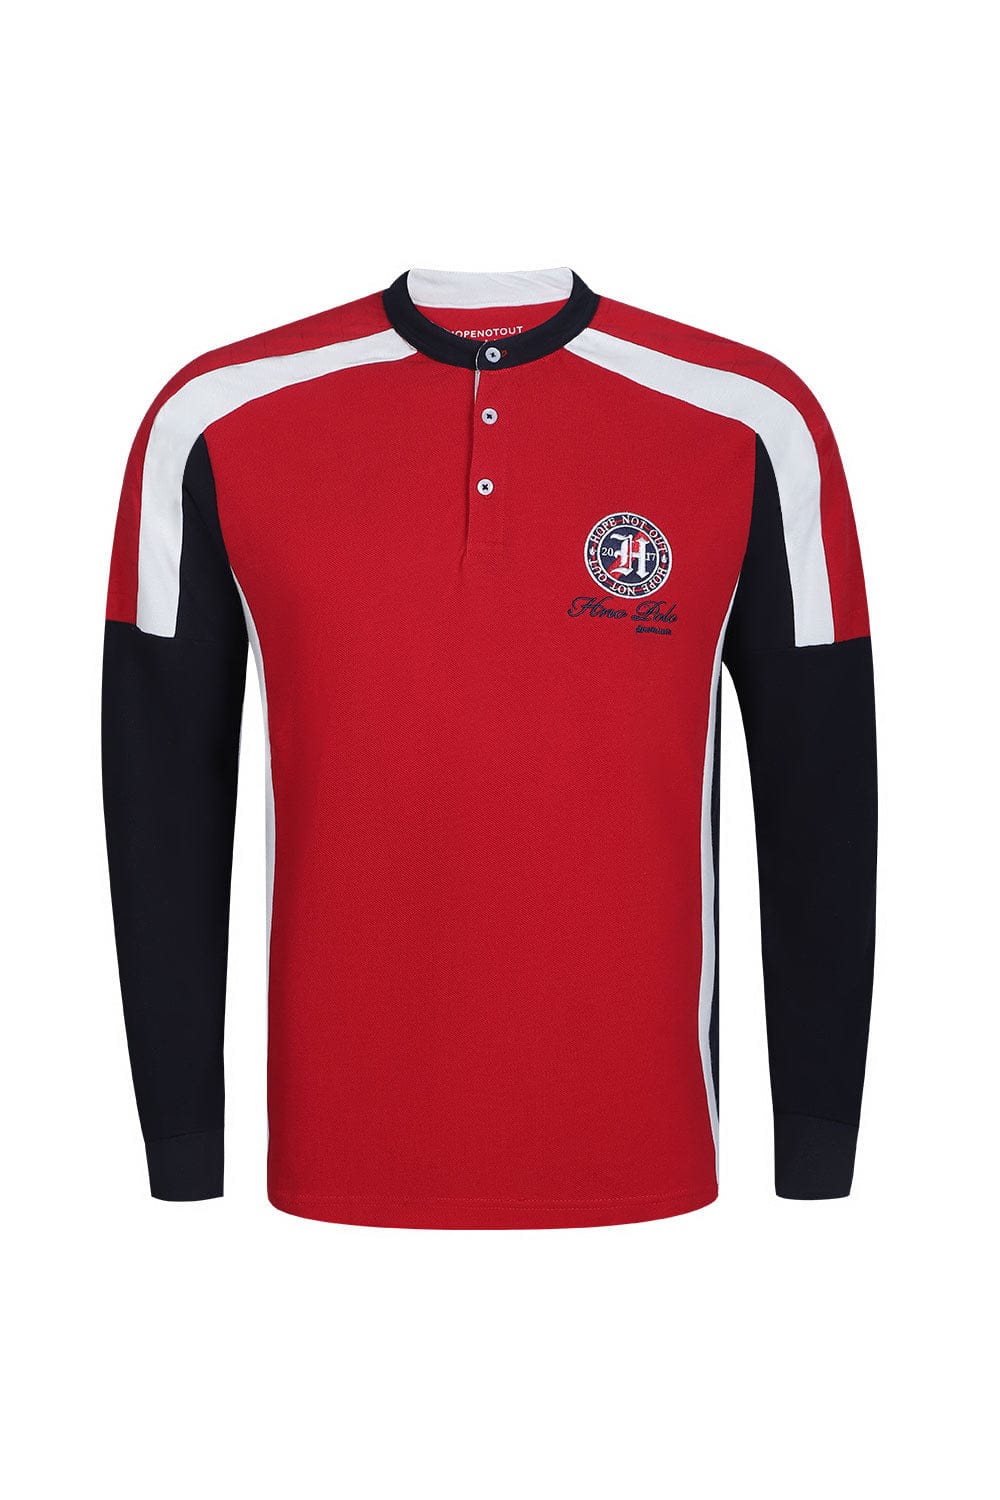 Hope Not Out by Shahid Afridi Men Polo Shirt Premium Embroidered Ban Polo with Cut and Sew Panel